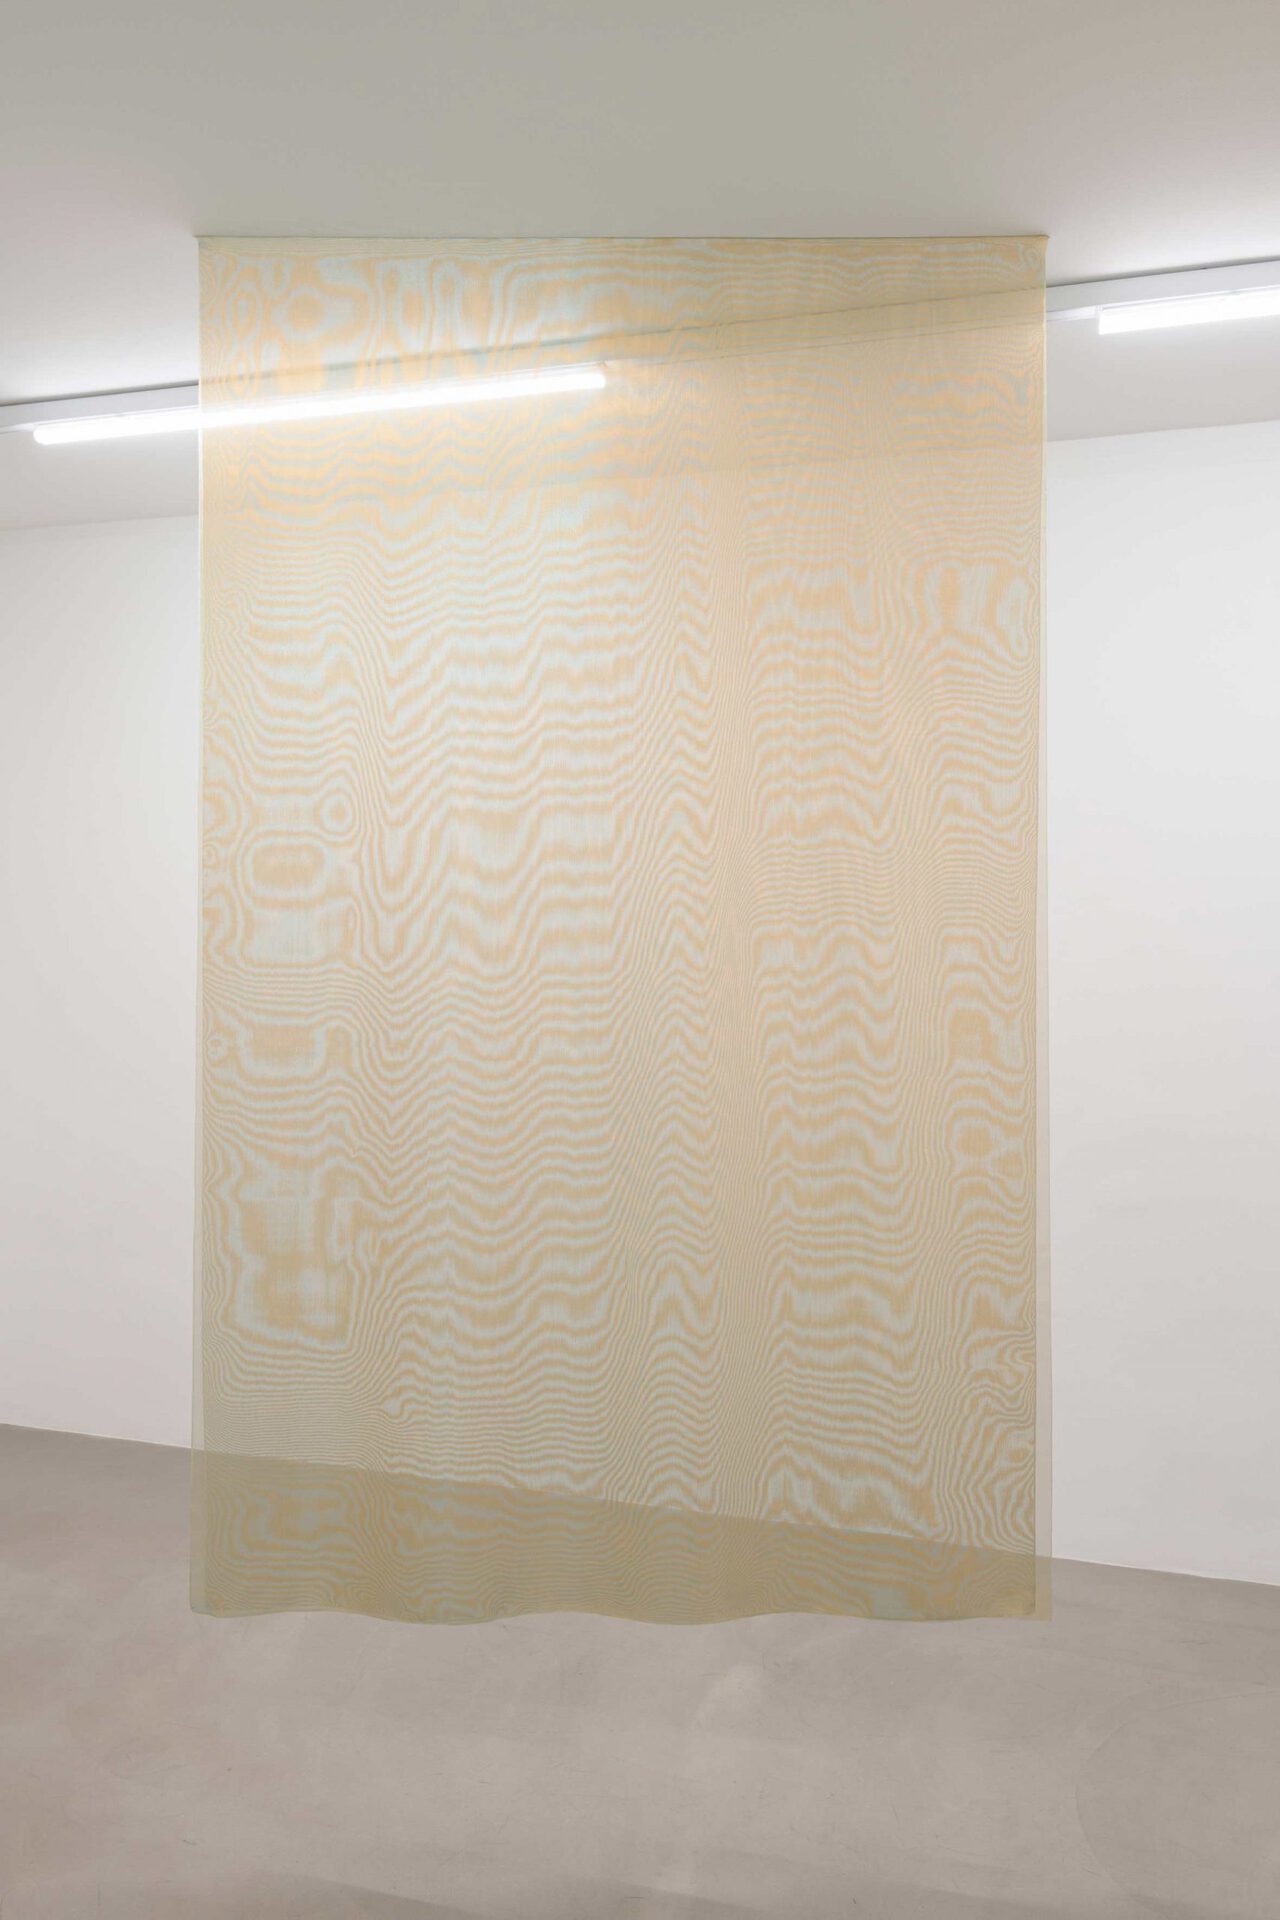 Nadia Guerroui, Friction in Plain Sight VI, 2021, ambient light and air stream, two layers of double tone polyester (165 x 260 cm), dimensions variable.